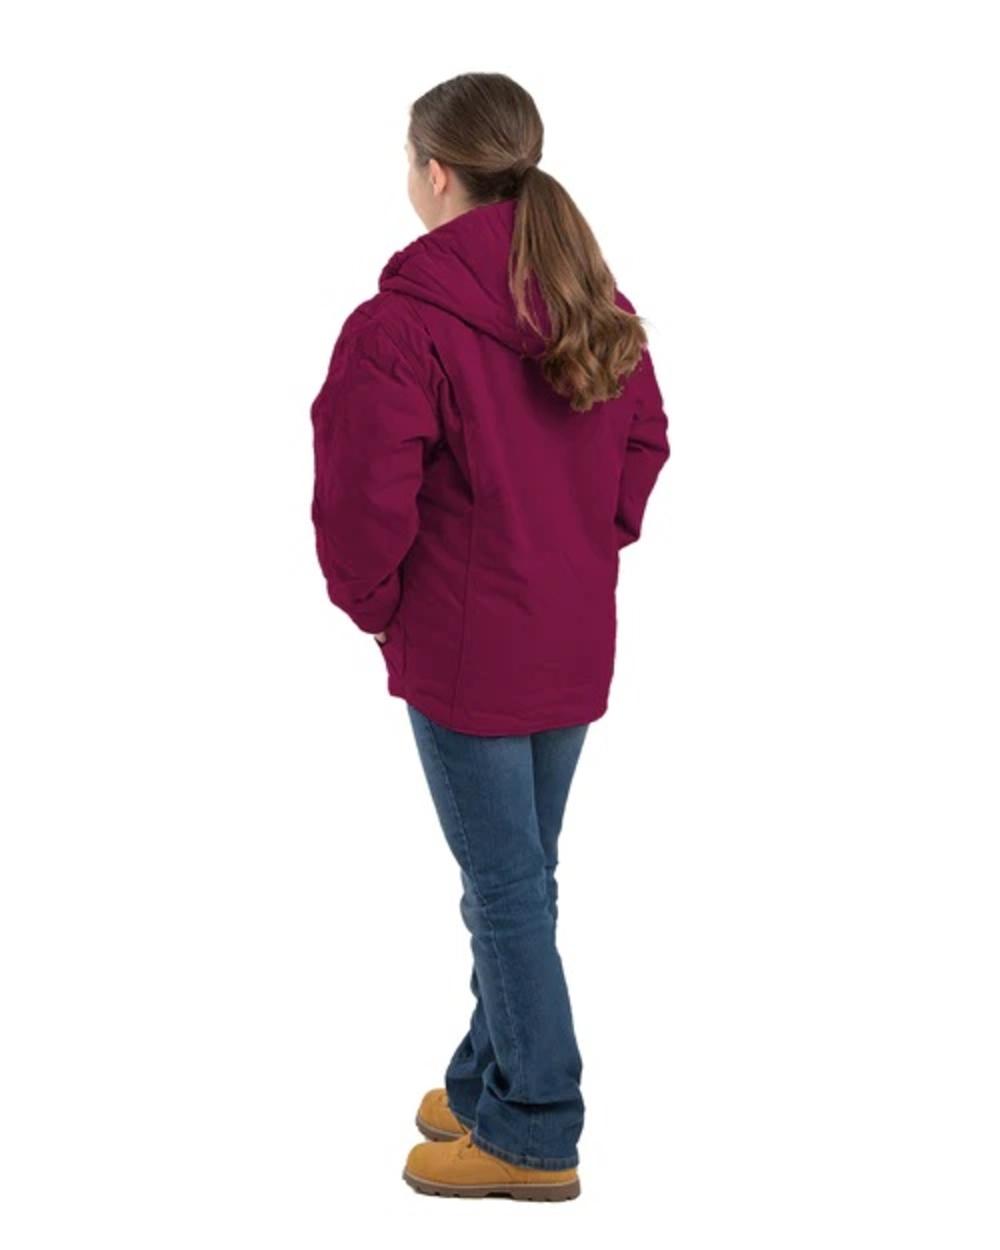 Youth Sherpa-Lined Softstone Duck Hooded Jacket